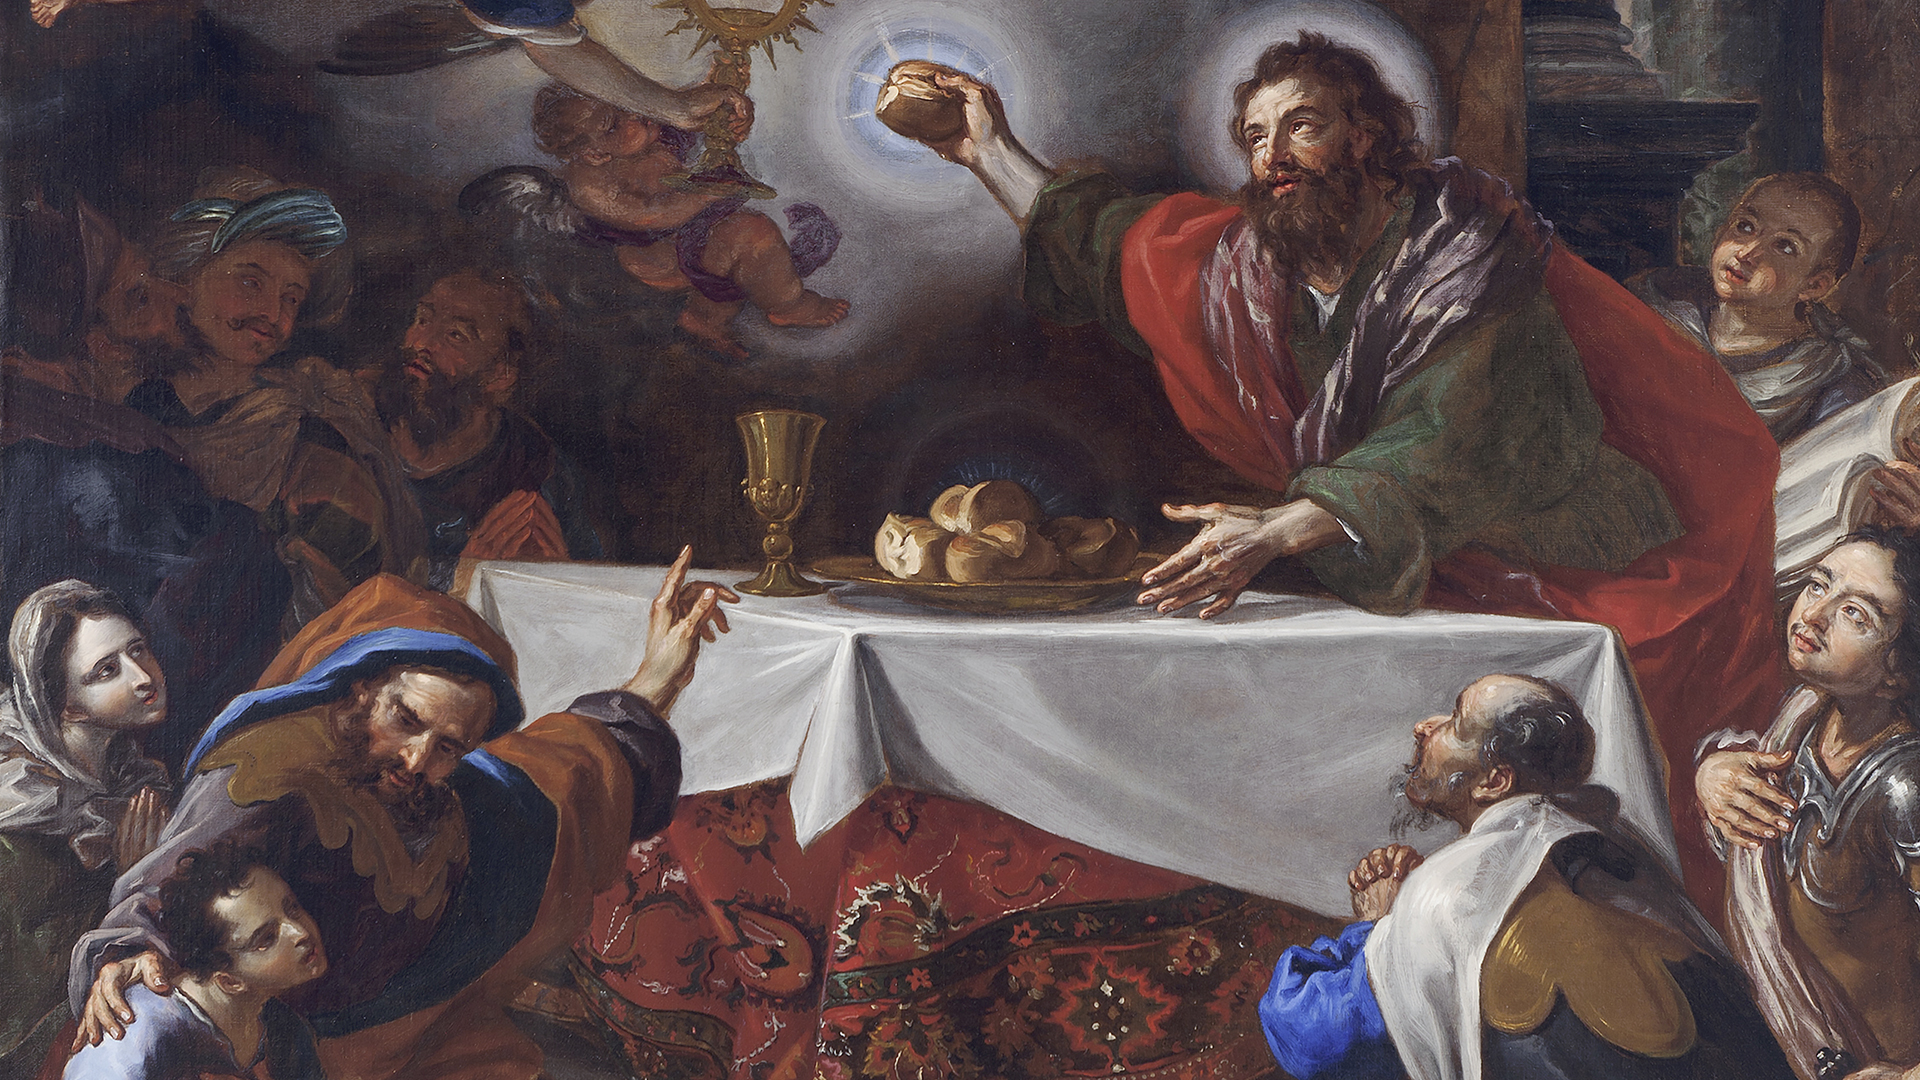 St. Paul at the Holy Communion by Caravoglia